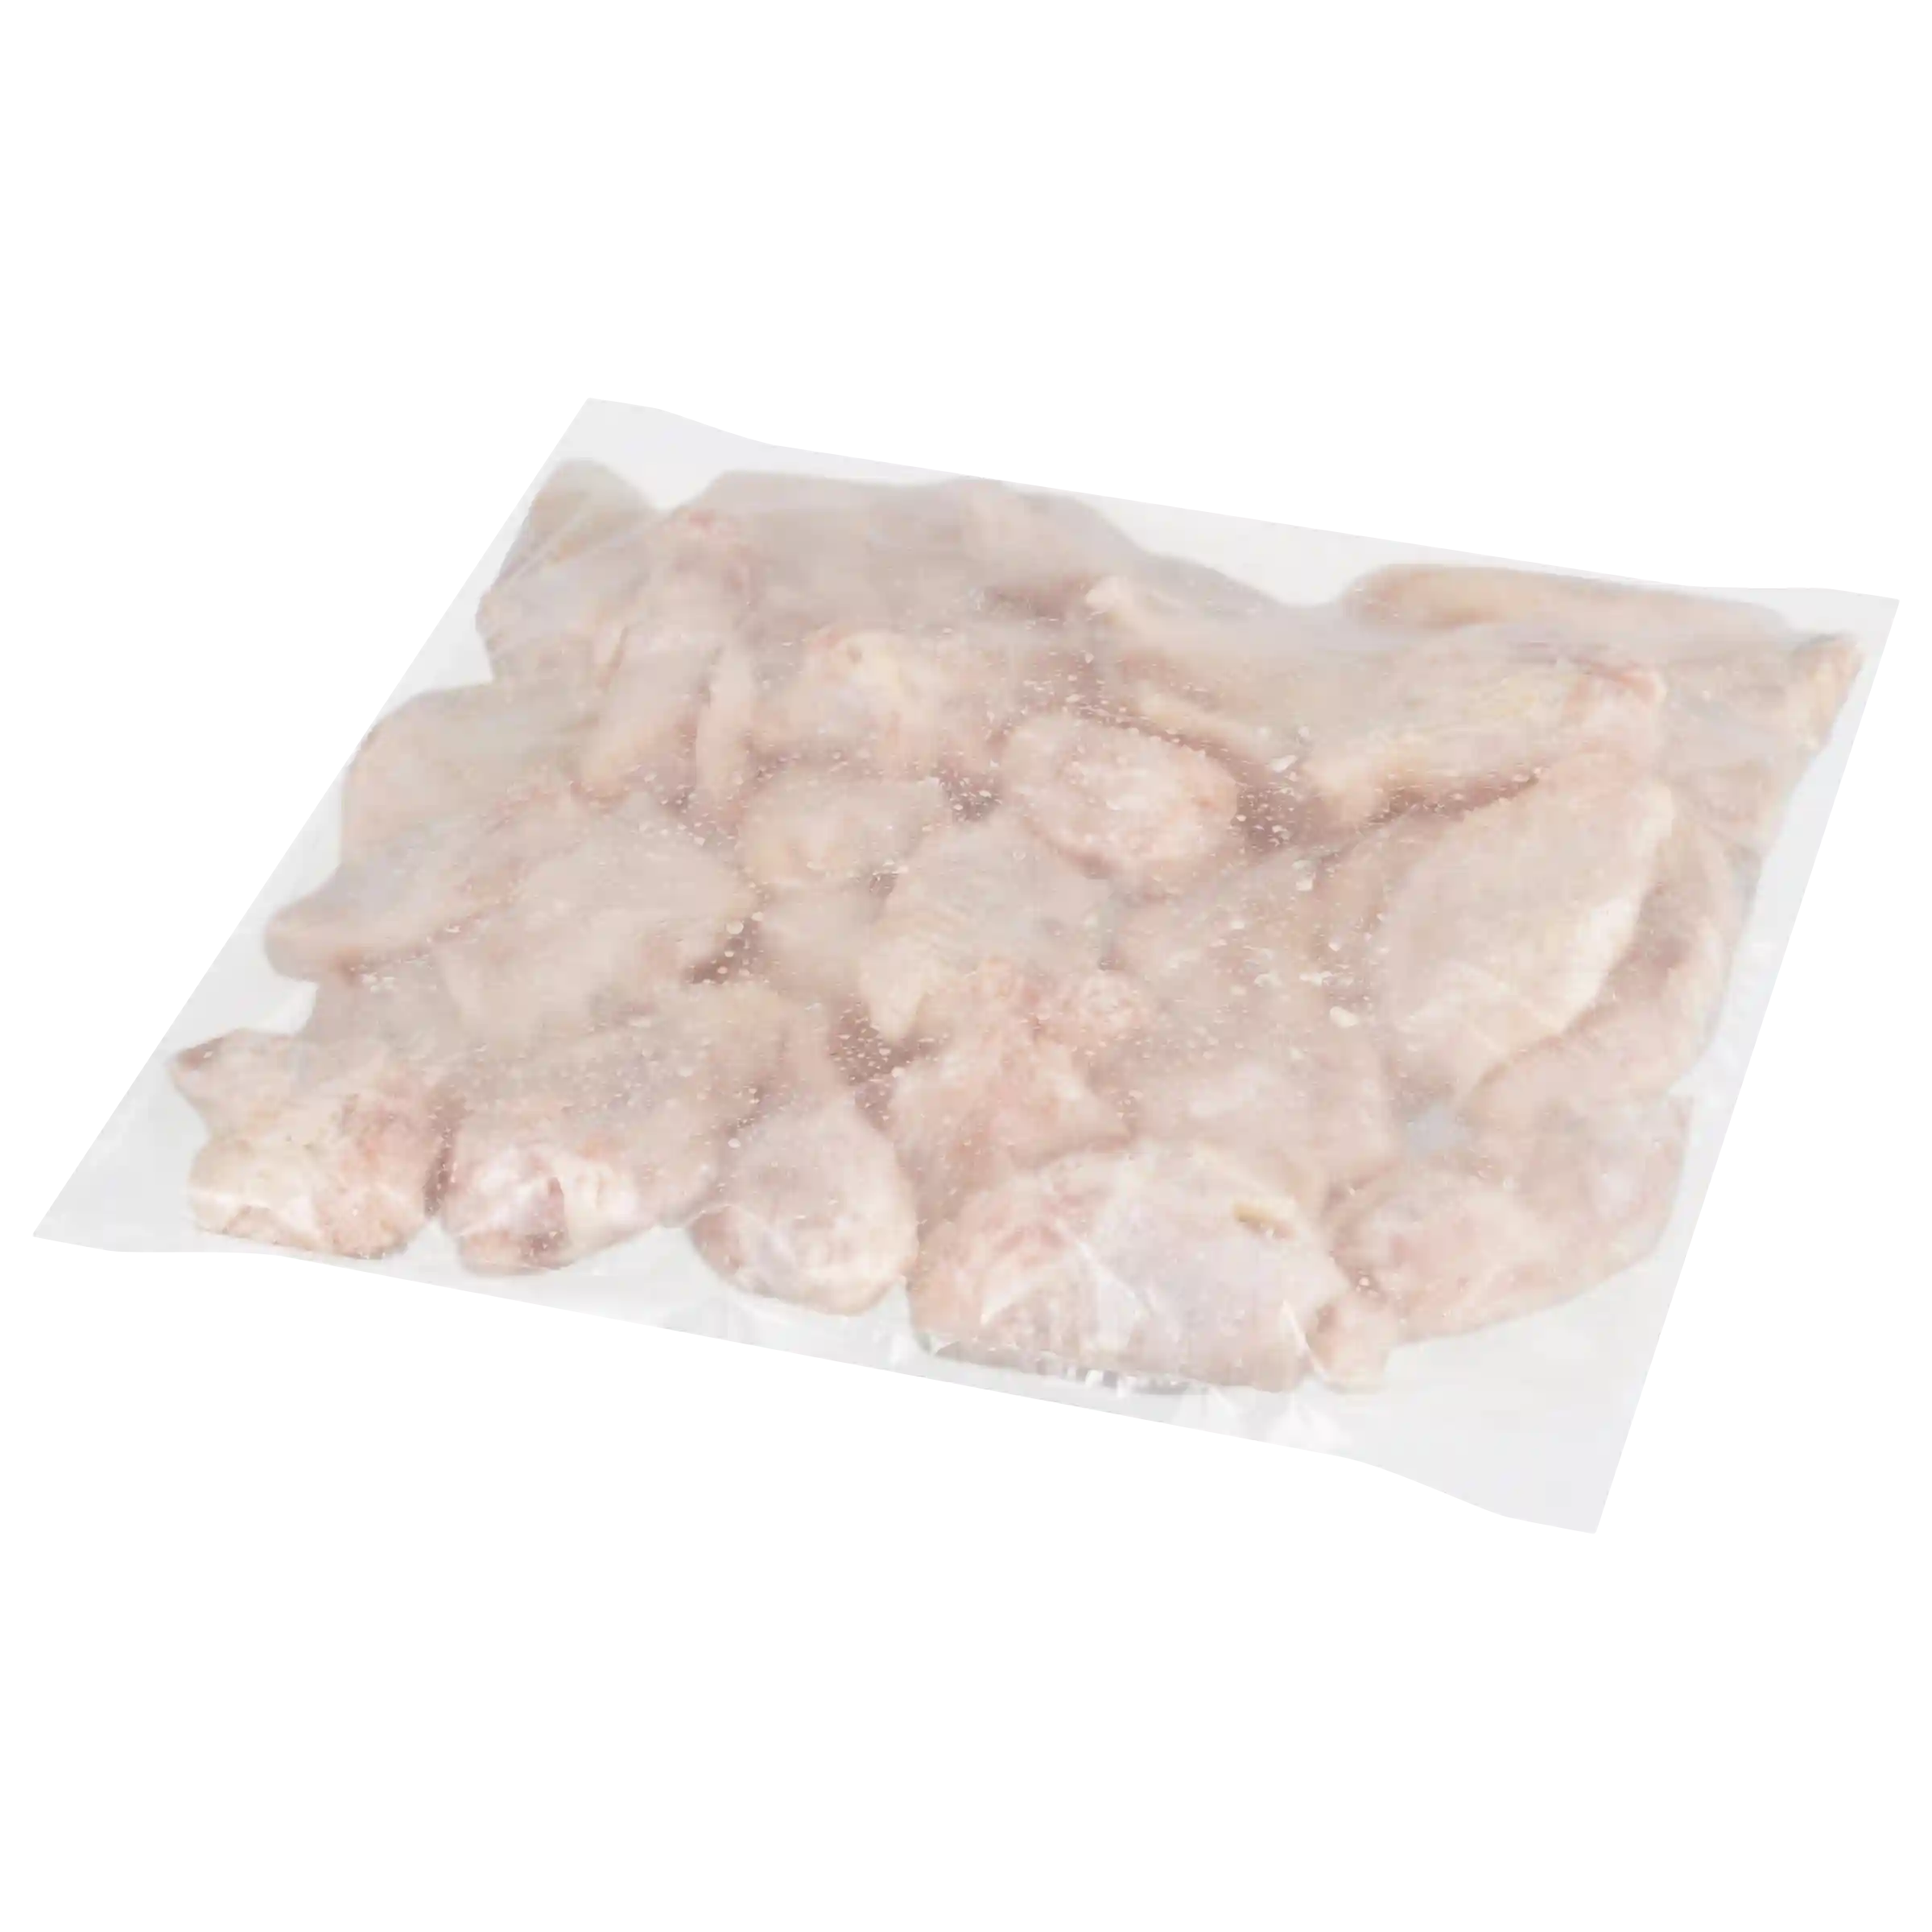 Tyson® IF Coated Bone-In Chicken Wing Sections, With Garlic Parmesan Seasoning Packets, Jumbo_image_11